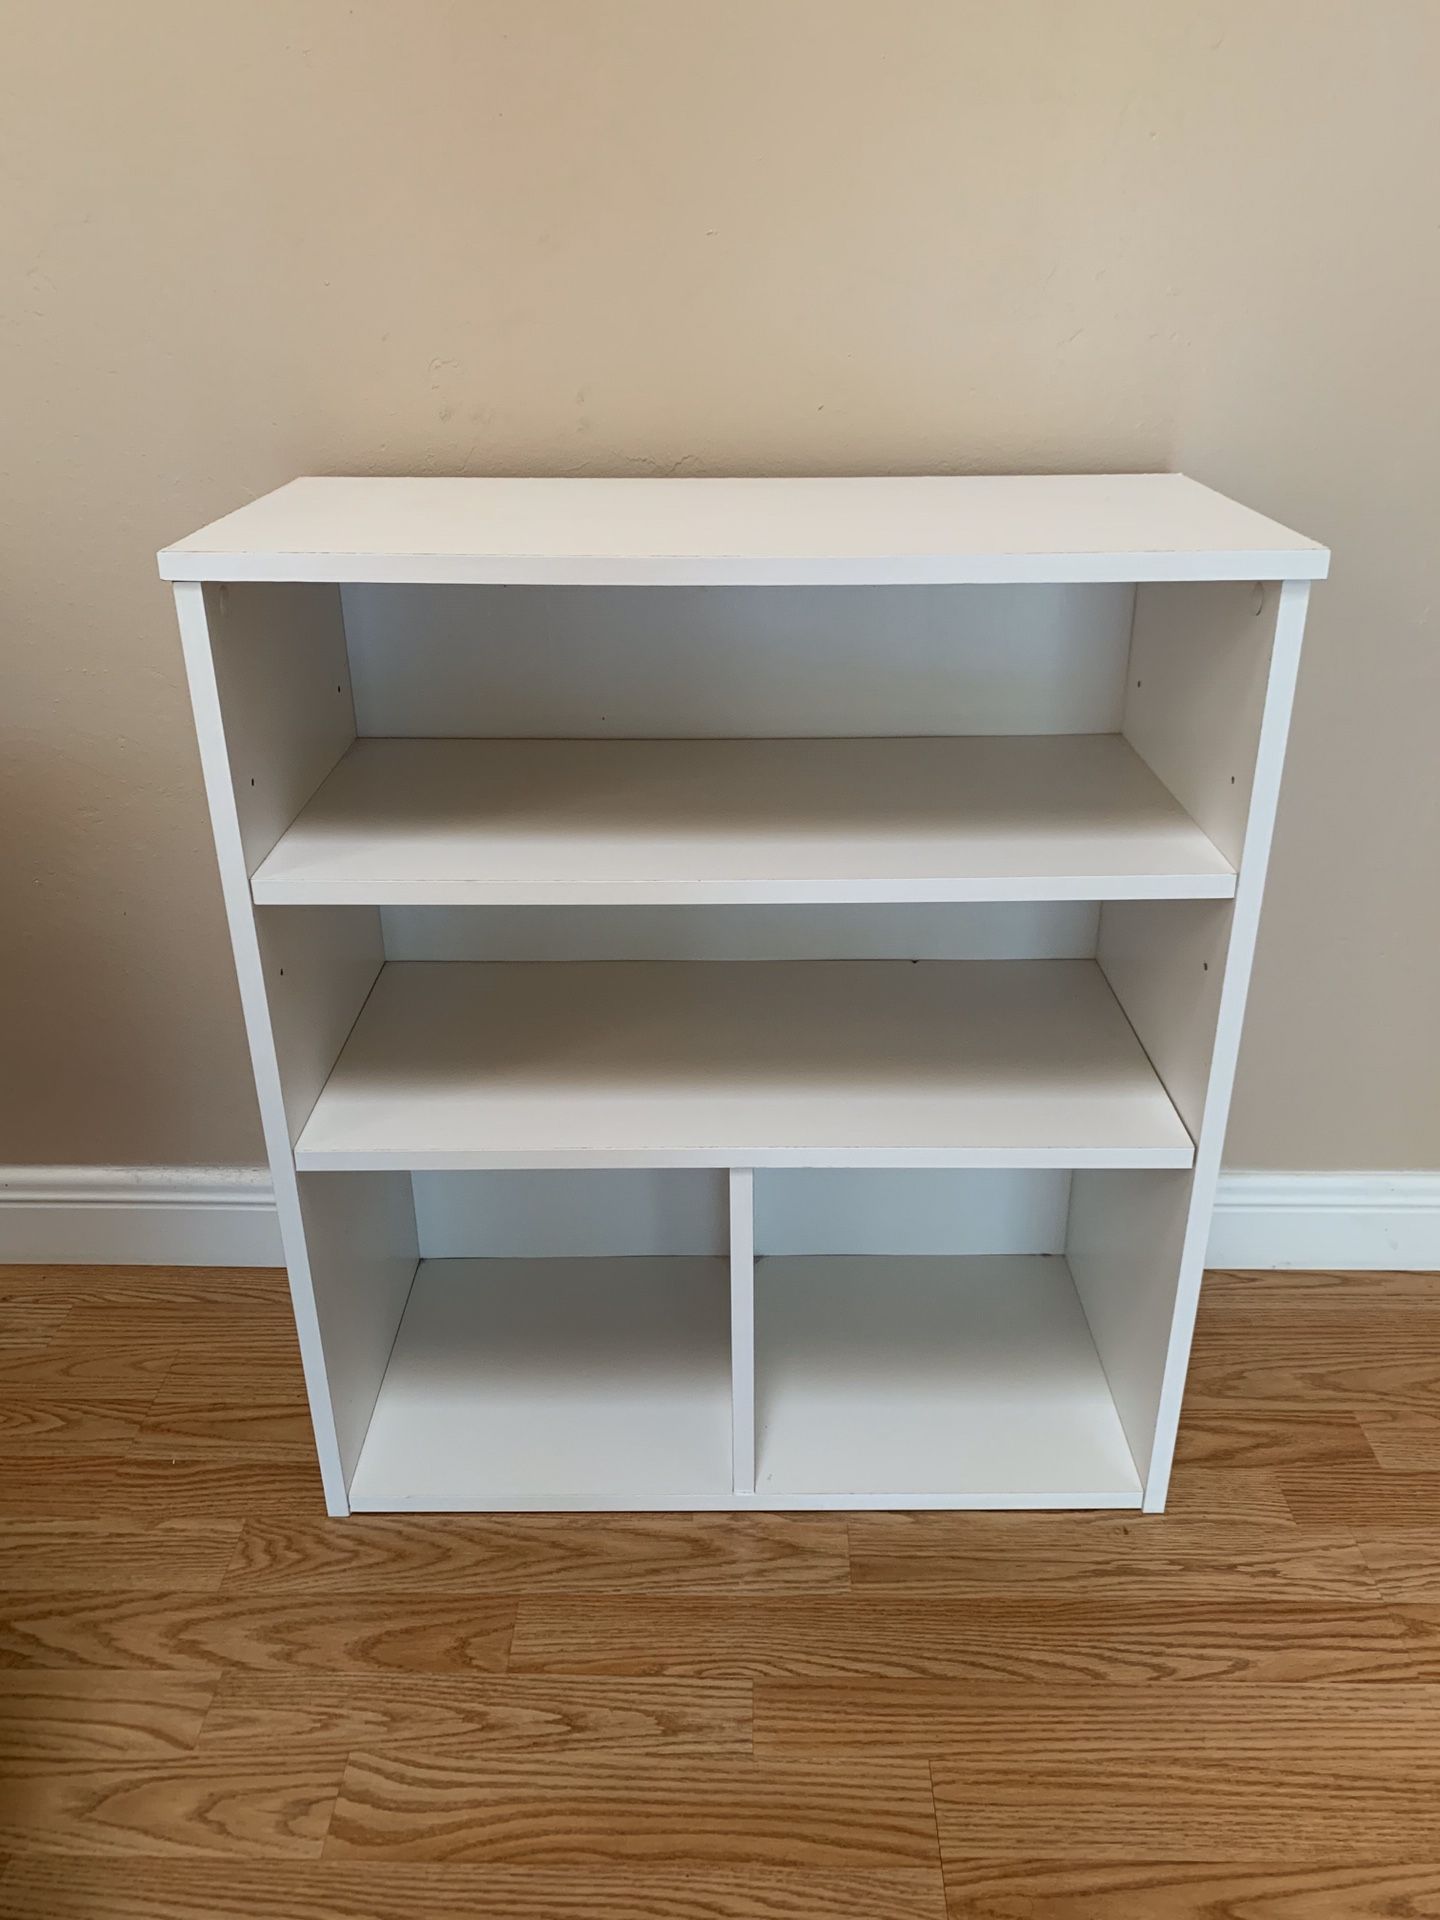 Cubby Storage with Shelves